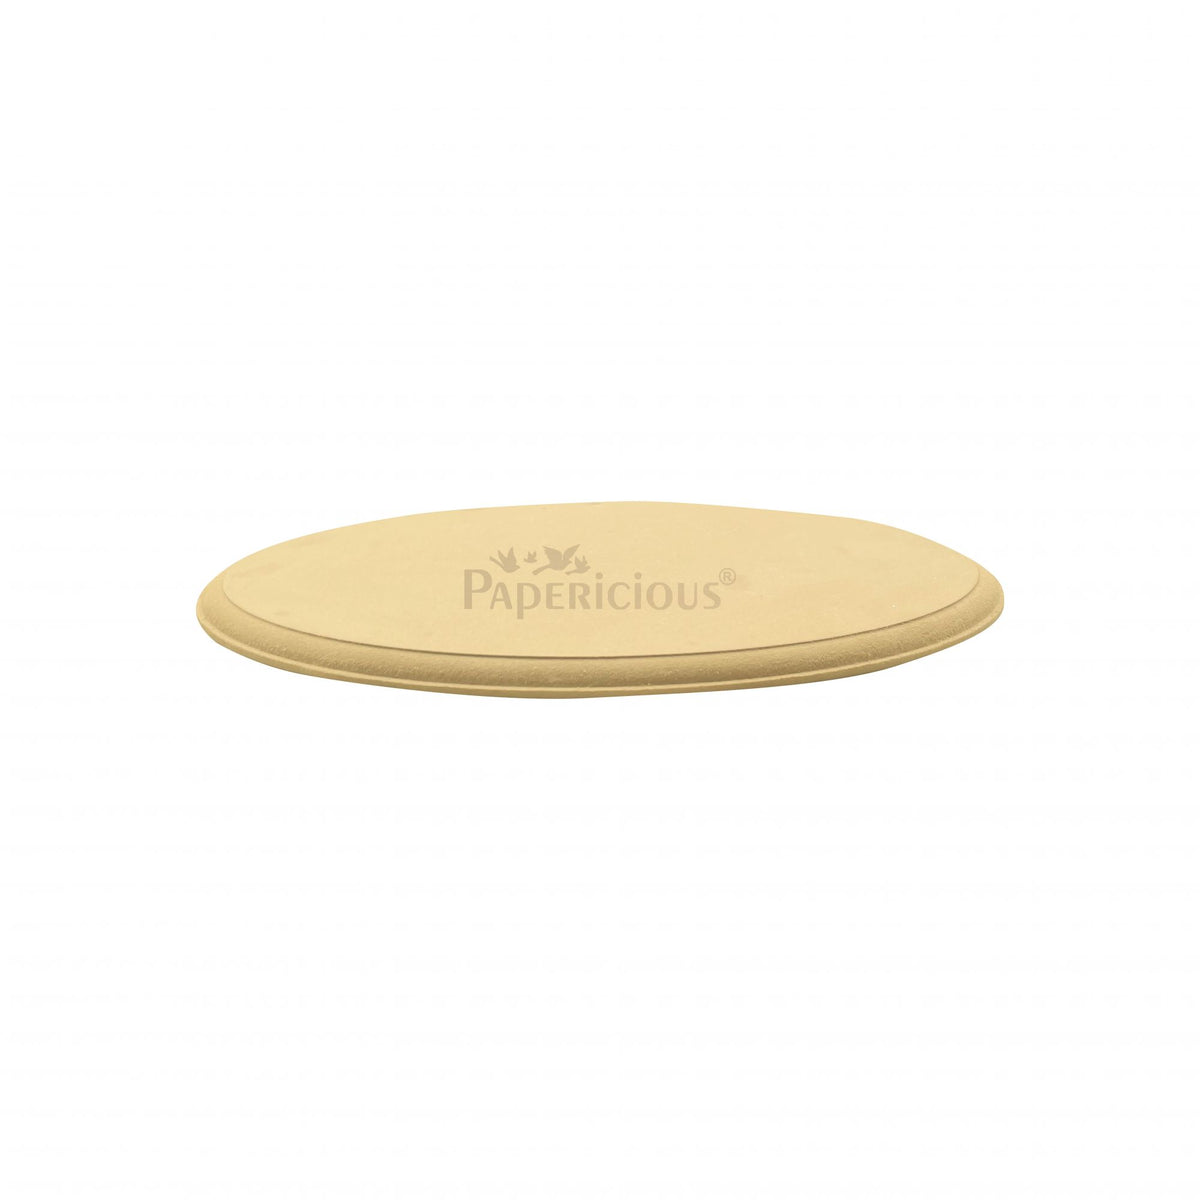 PAPERICIOUS MDF Oval Base - 12 mm thick